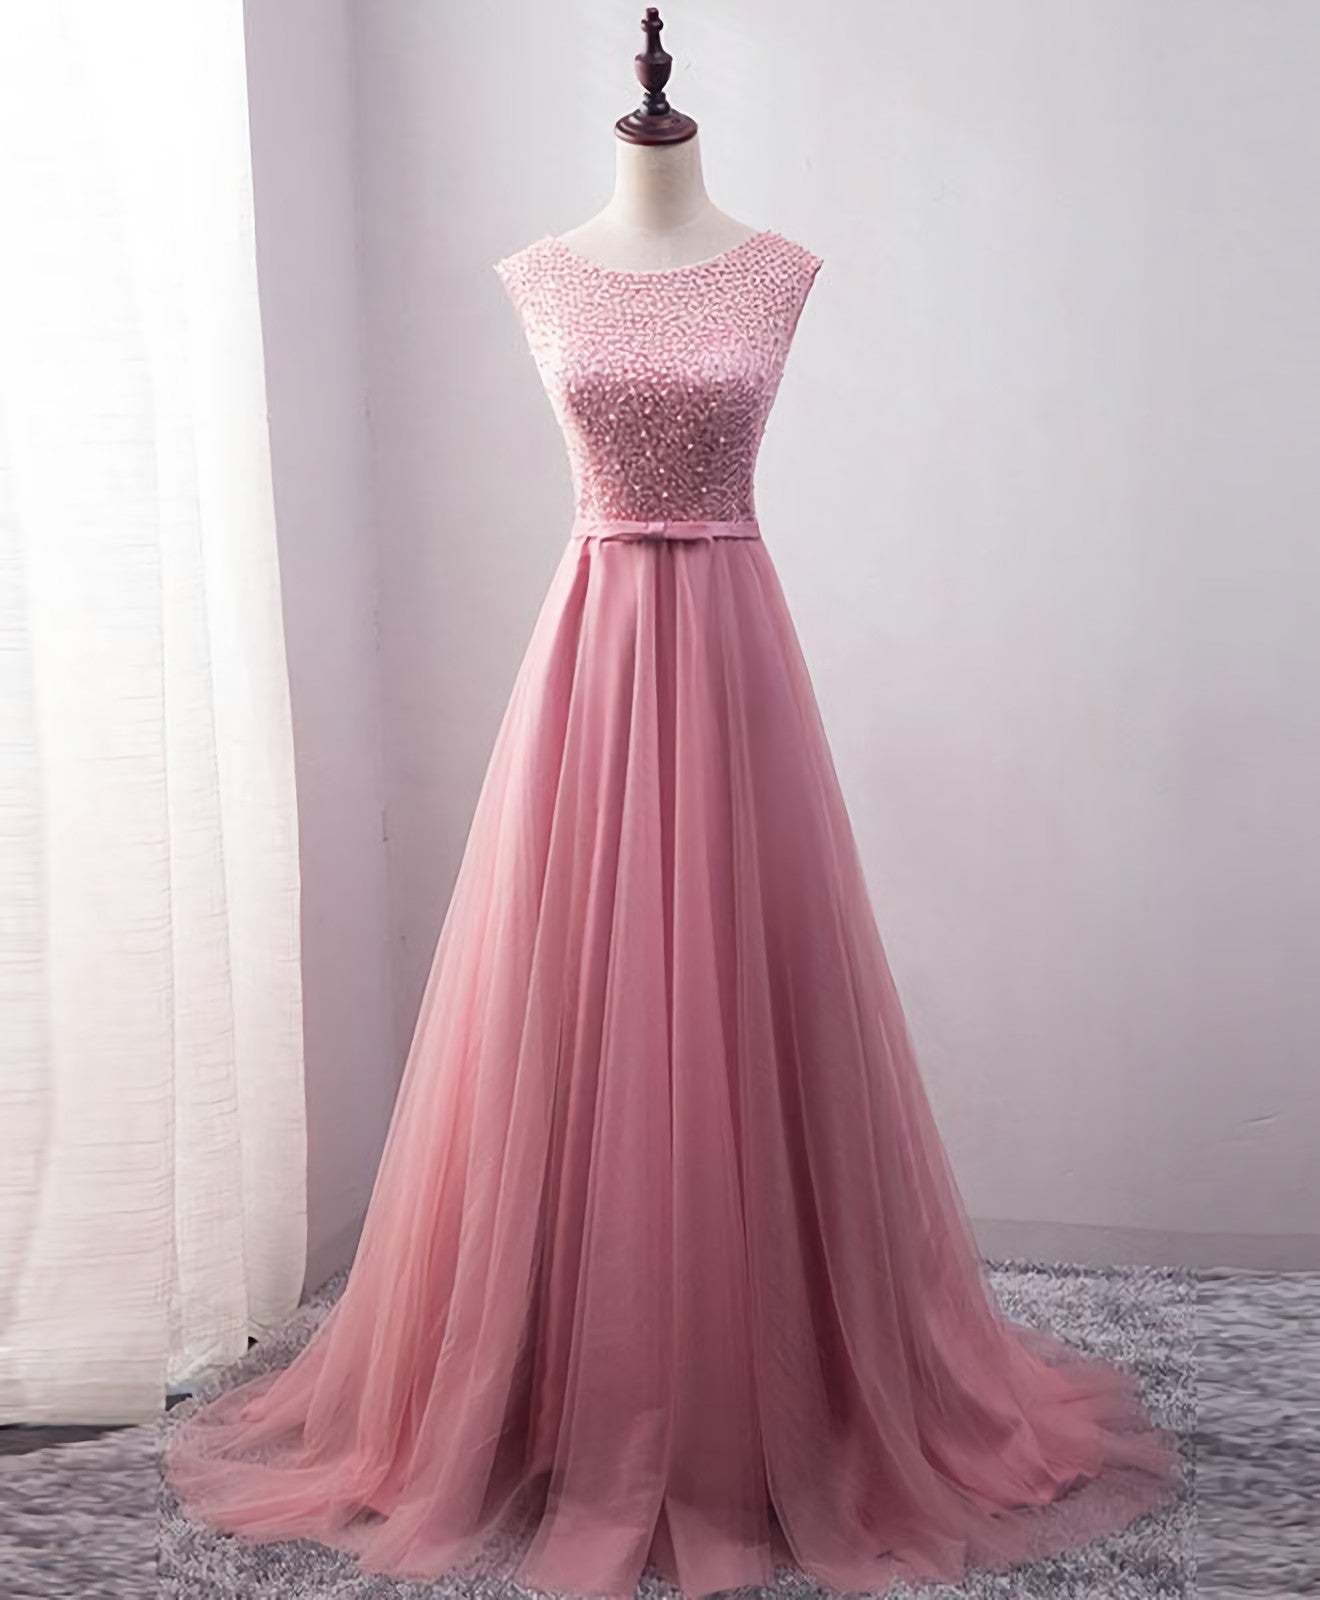 Homecomeing Dresses Short, Pink Tulle Long A Line Prom Dress, Pink Evening Dress